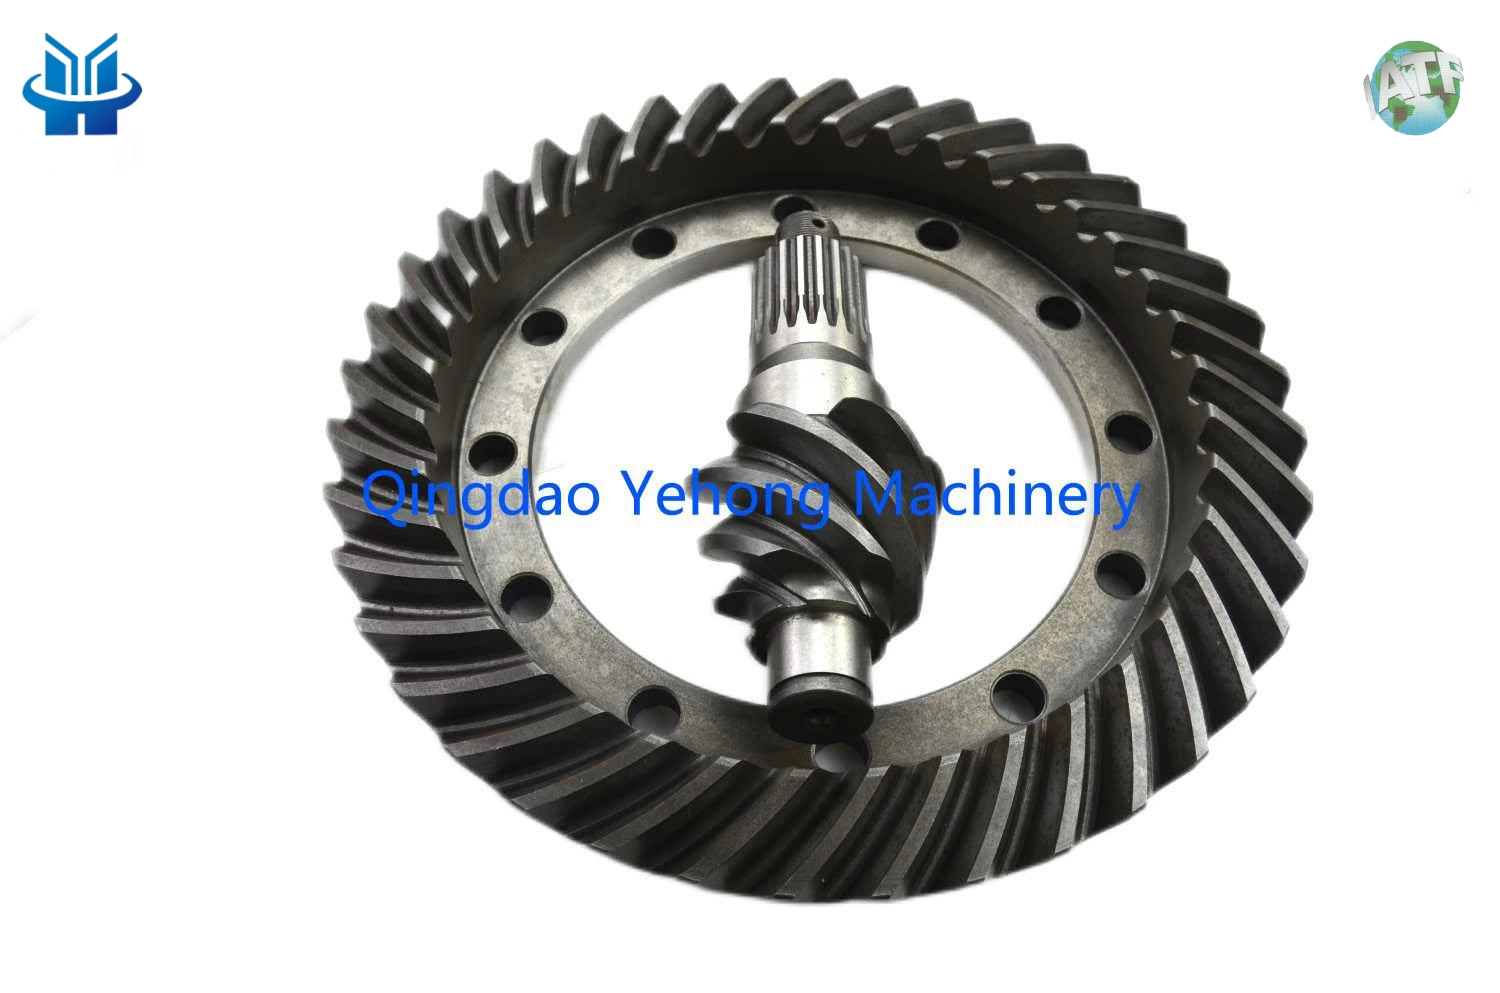 Differential Gearbox Transmission OEM Mc075131 6/37 Basin Angle Gear for Mitsubishi PS135